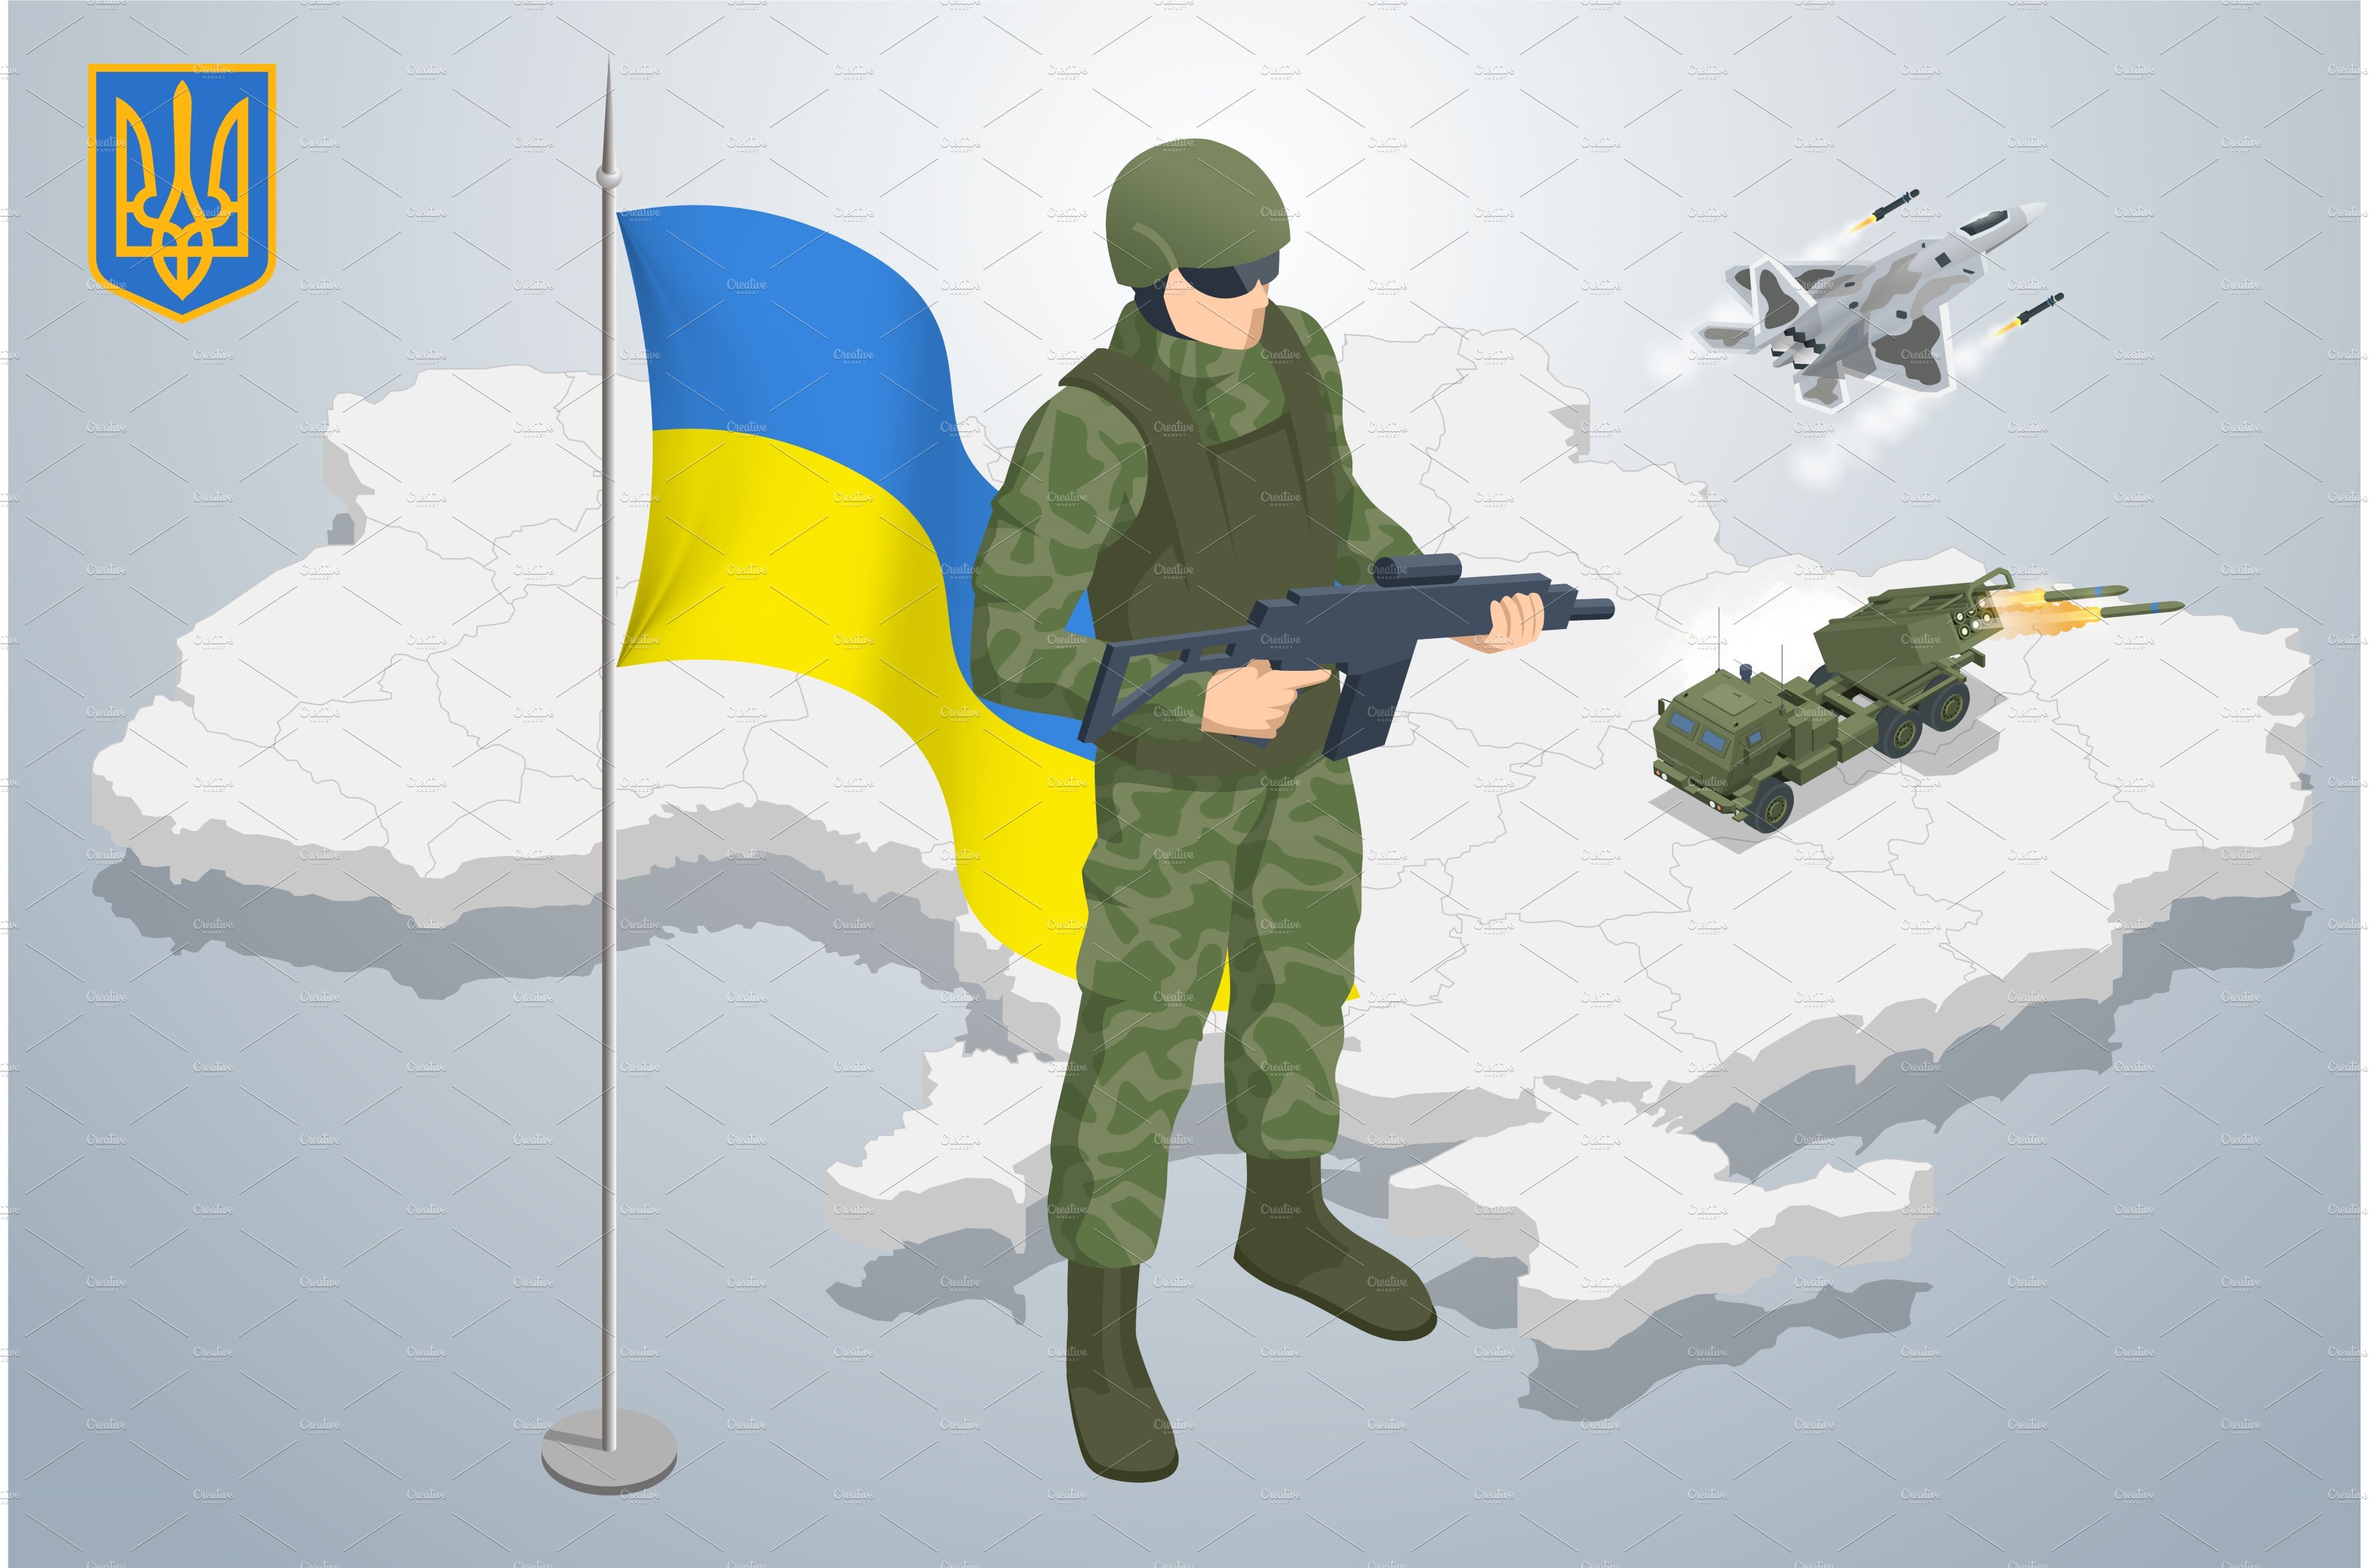 Isometric Ukrainian soldier on the cover image.